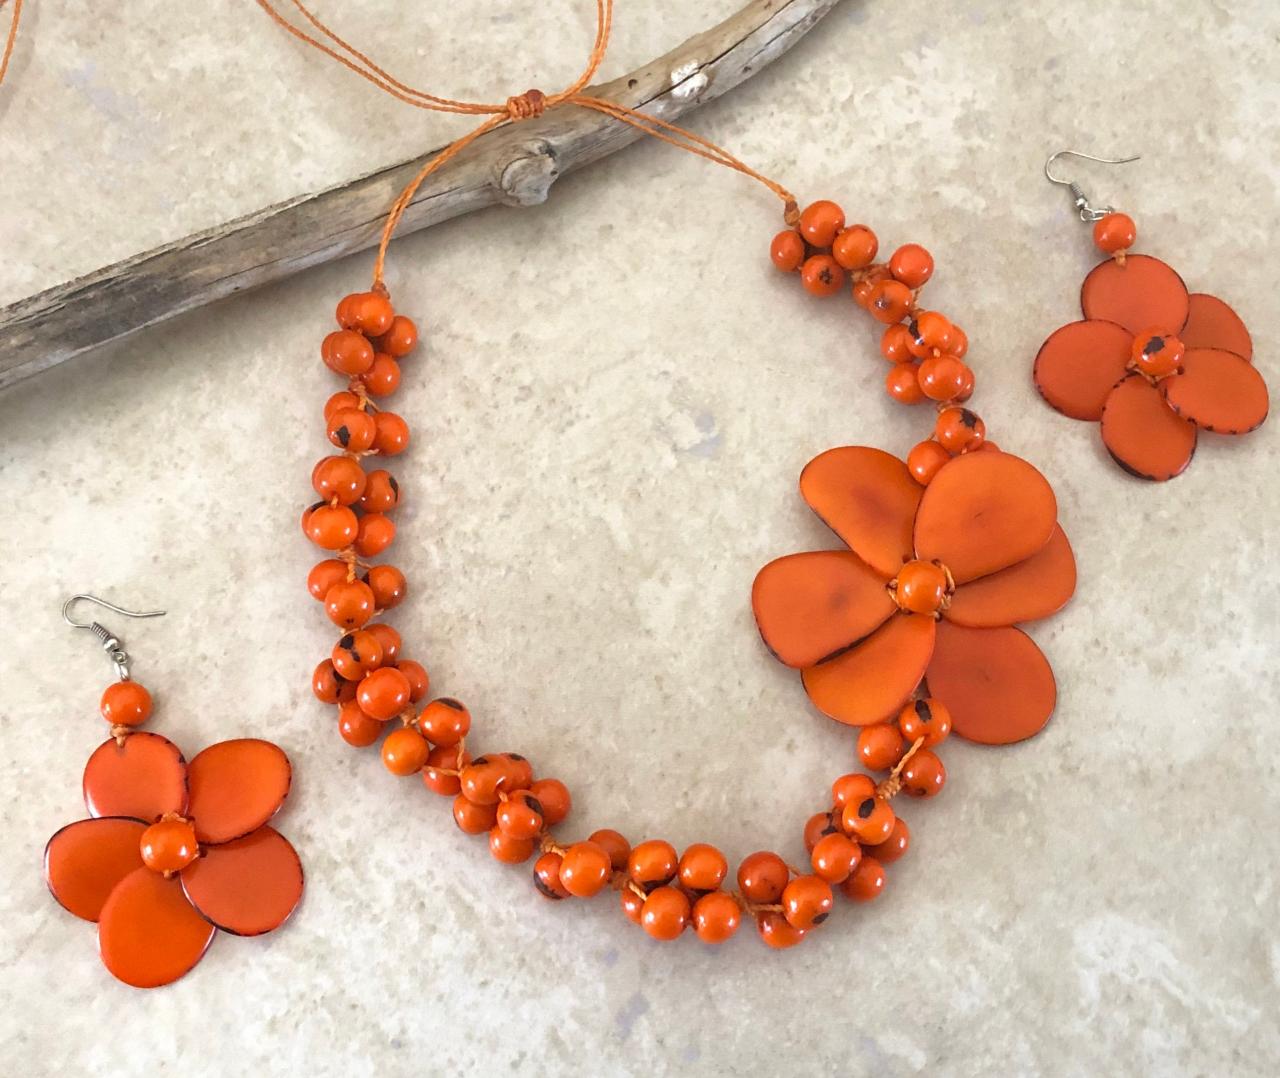 Orange Tagua Necklace And Earrings, Acai Seeds Necklace, Statement Necklace, Summer Necklace, Vegan Necklace, Beach Necklace, Flower Neck